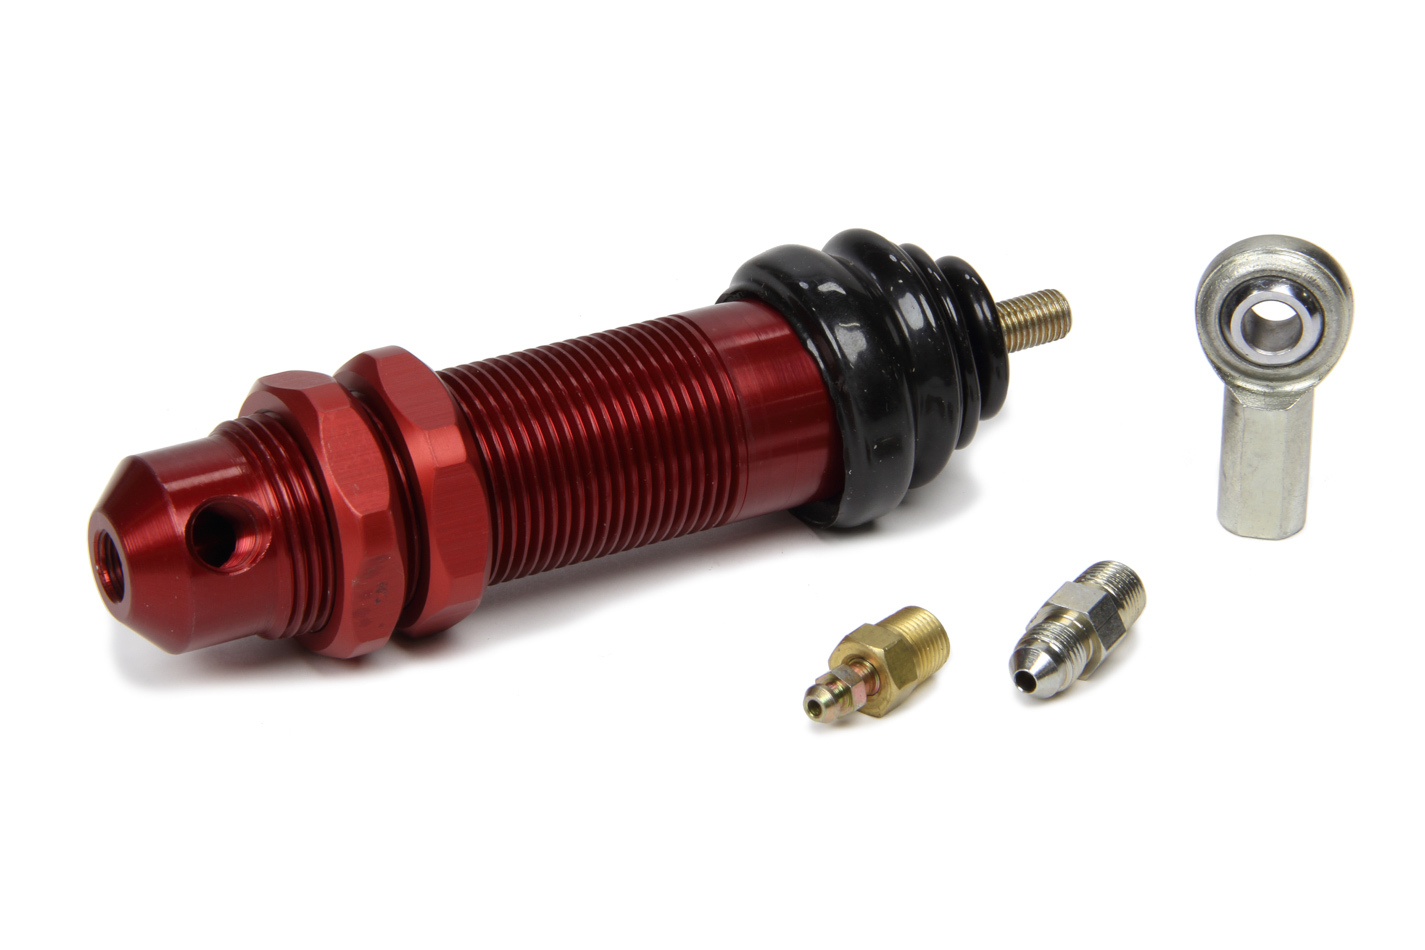 Coleman Racing Products 375-300 - Clutch Slave Cylinder, 7/8 in Bore, 1-3/8 in Stroke, Push Type, Aluminum / Steel, Red Anodized, Each